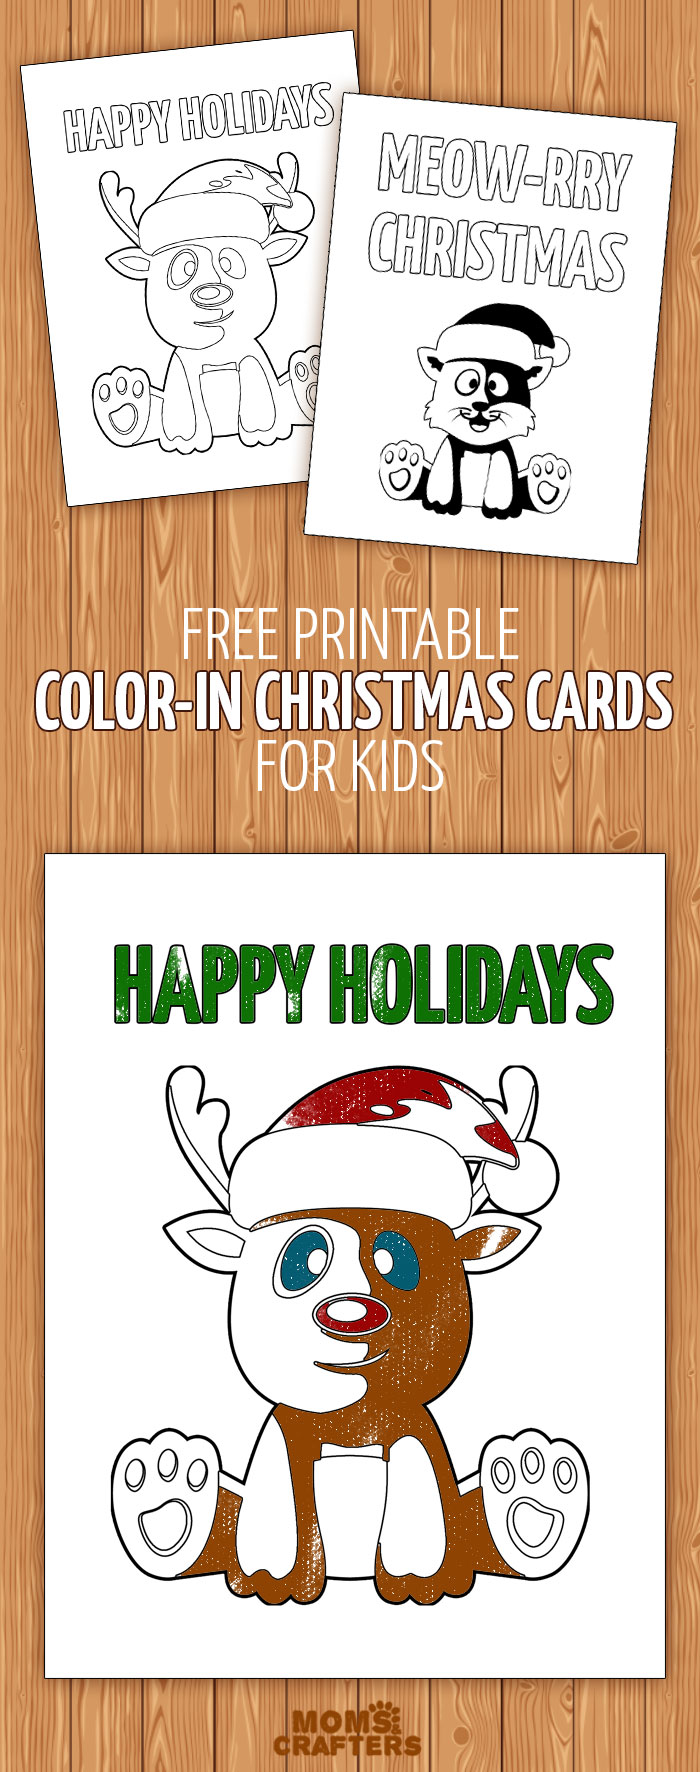 Free printable color-in holiday cards for kids - these christmas cards are so cute! Great ideas for kid-made cards without the mess, to involve kids in the holidays.